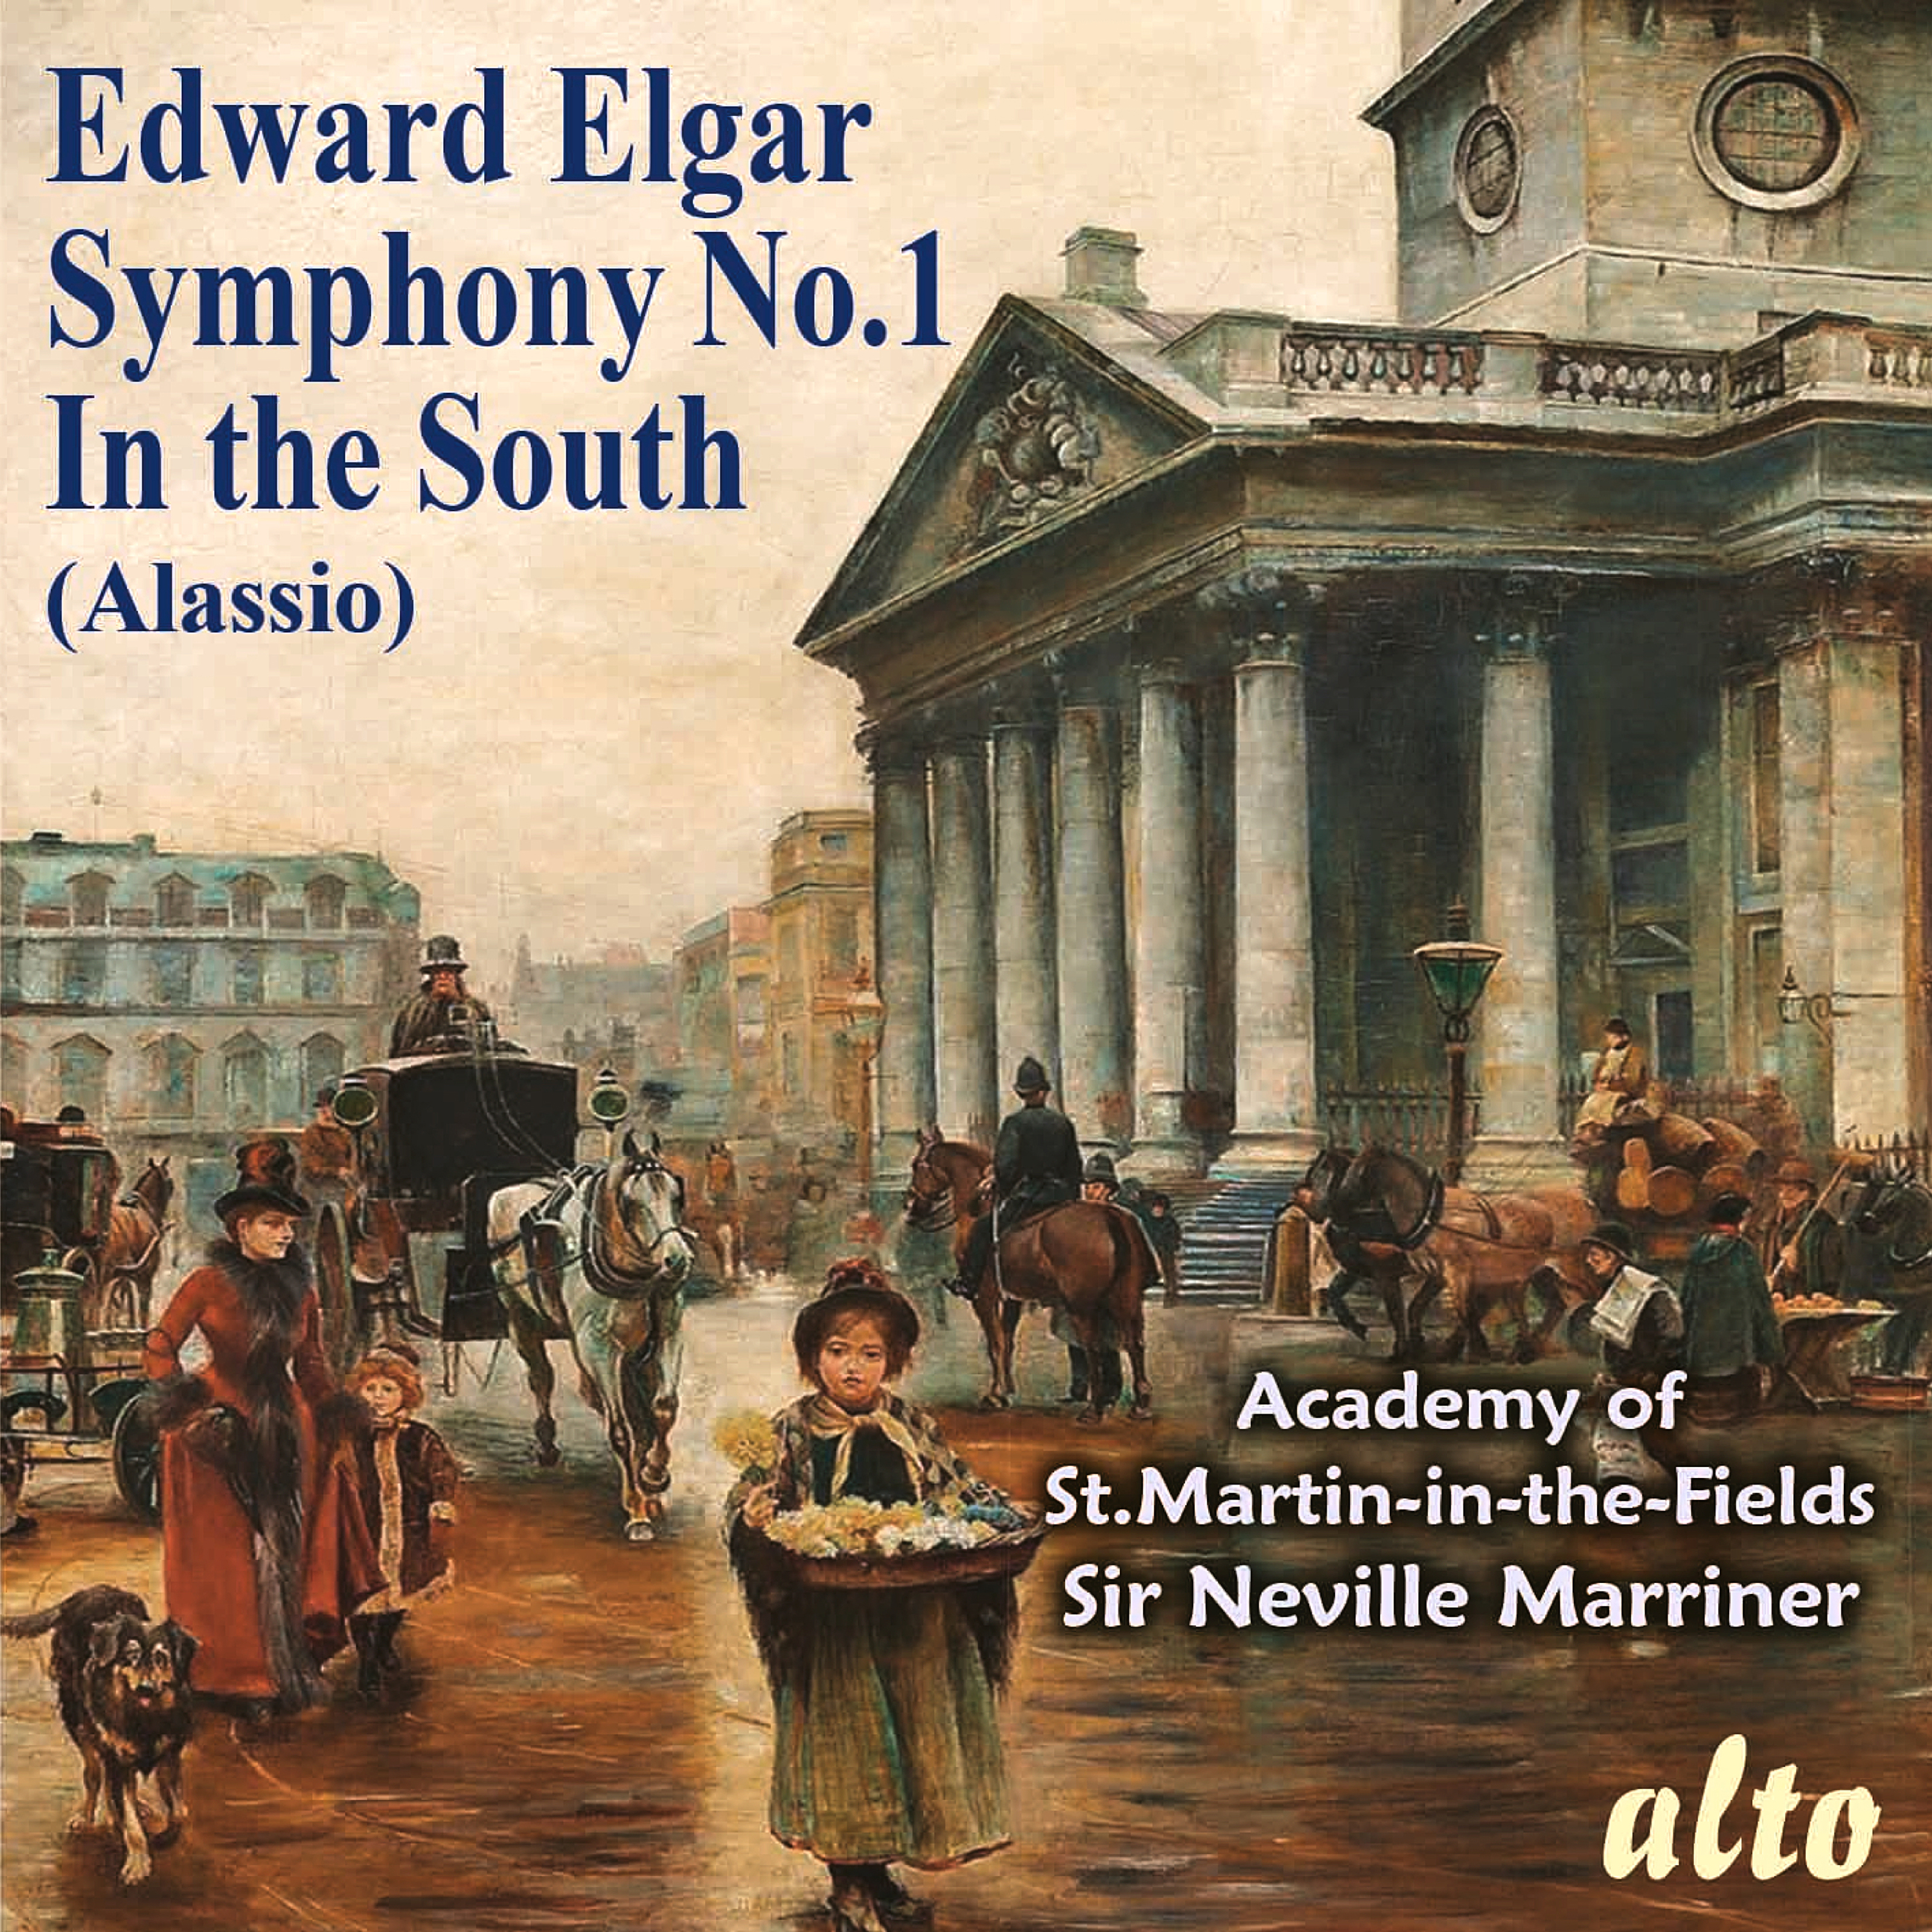 Elgar: In the South Overture, Op. 50, "Alassio" & Symphony No. 1 in A-Flat Major, Op. 55